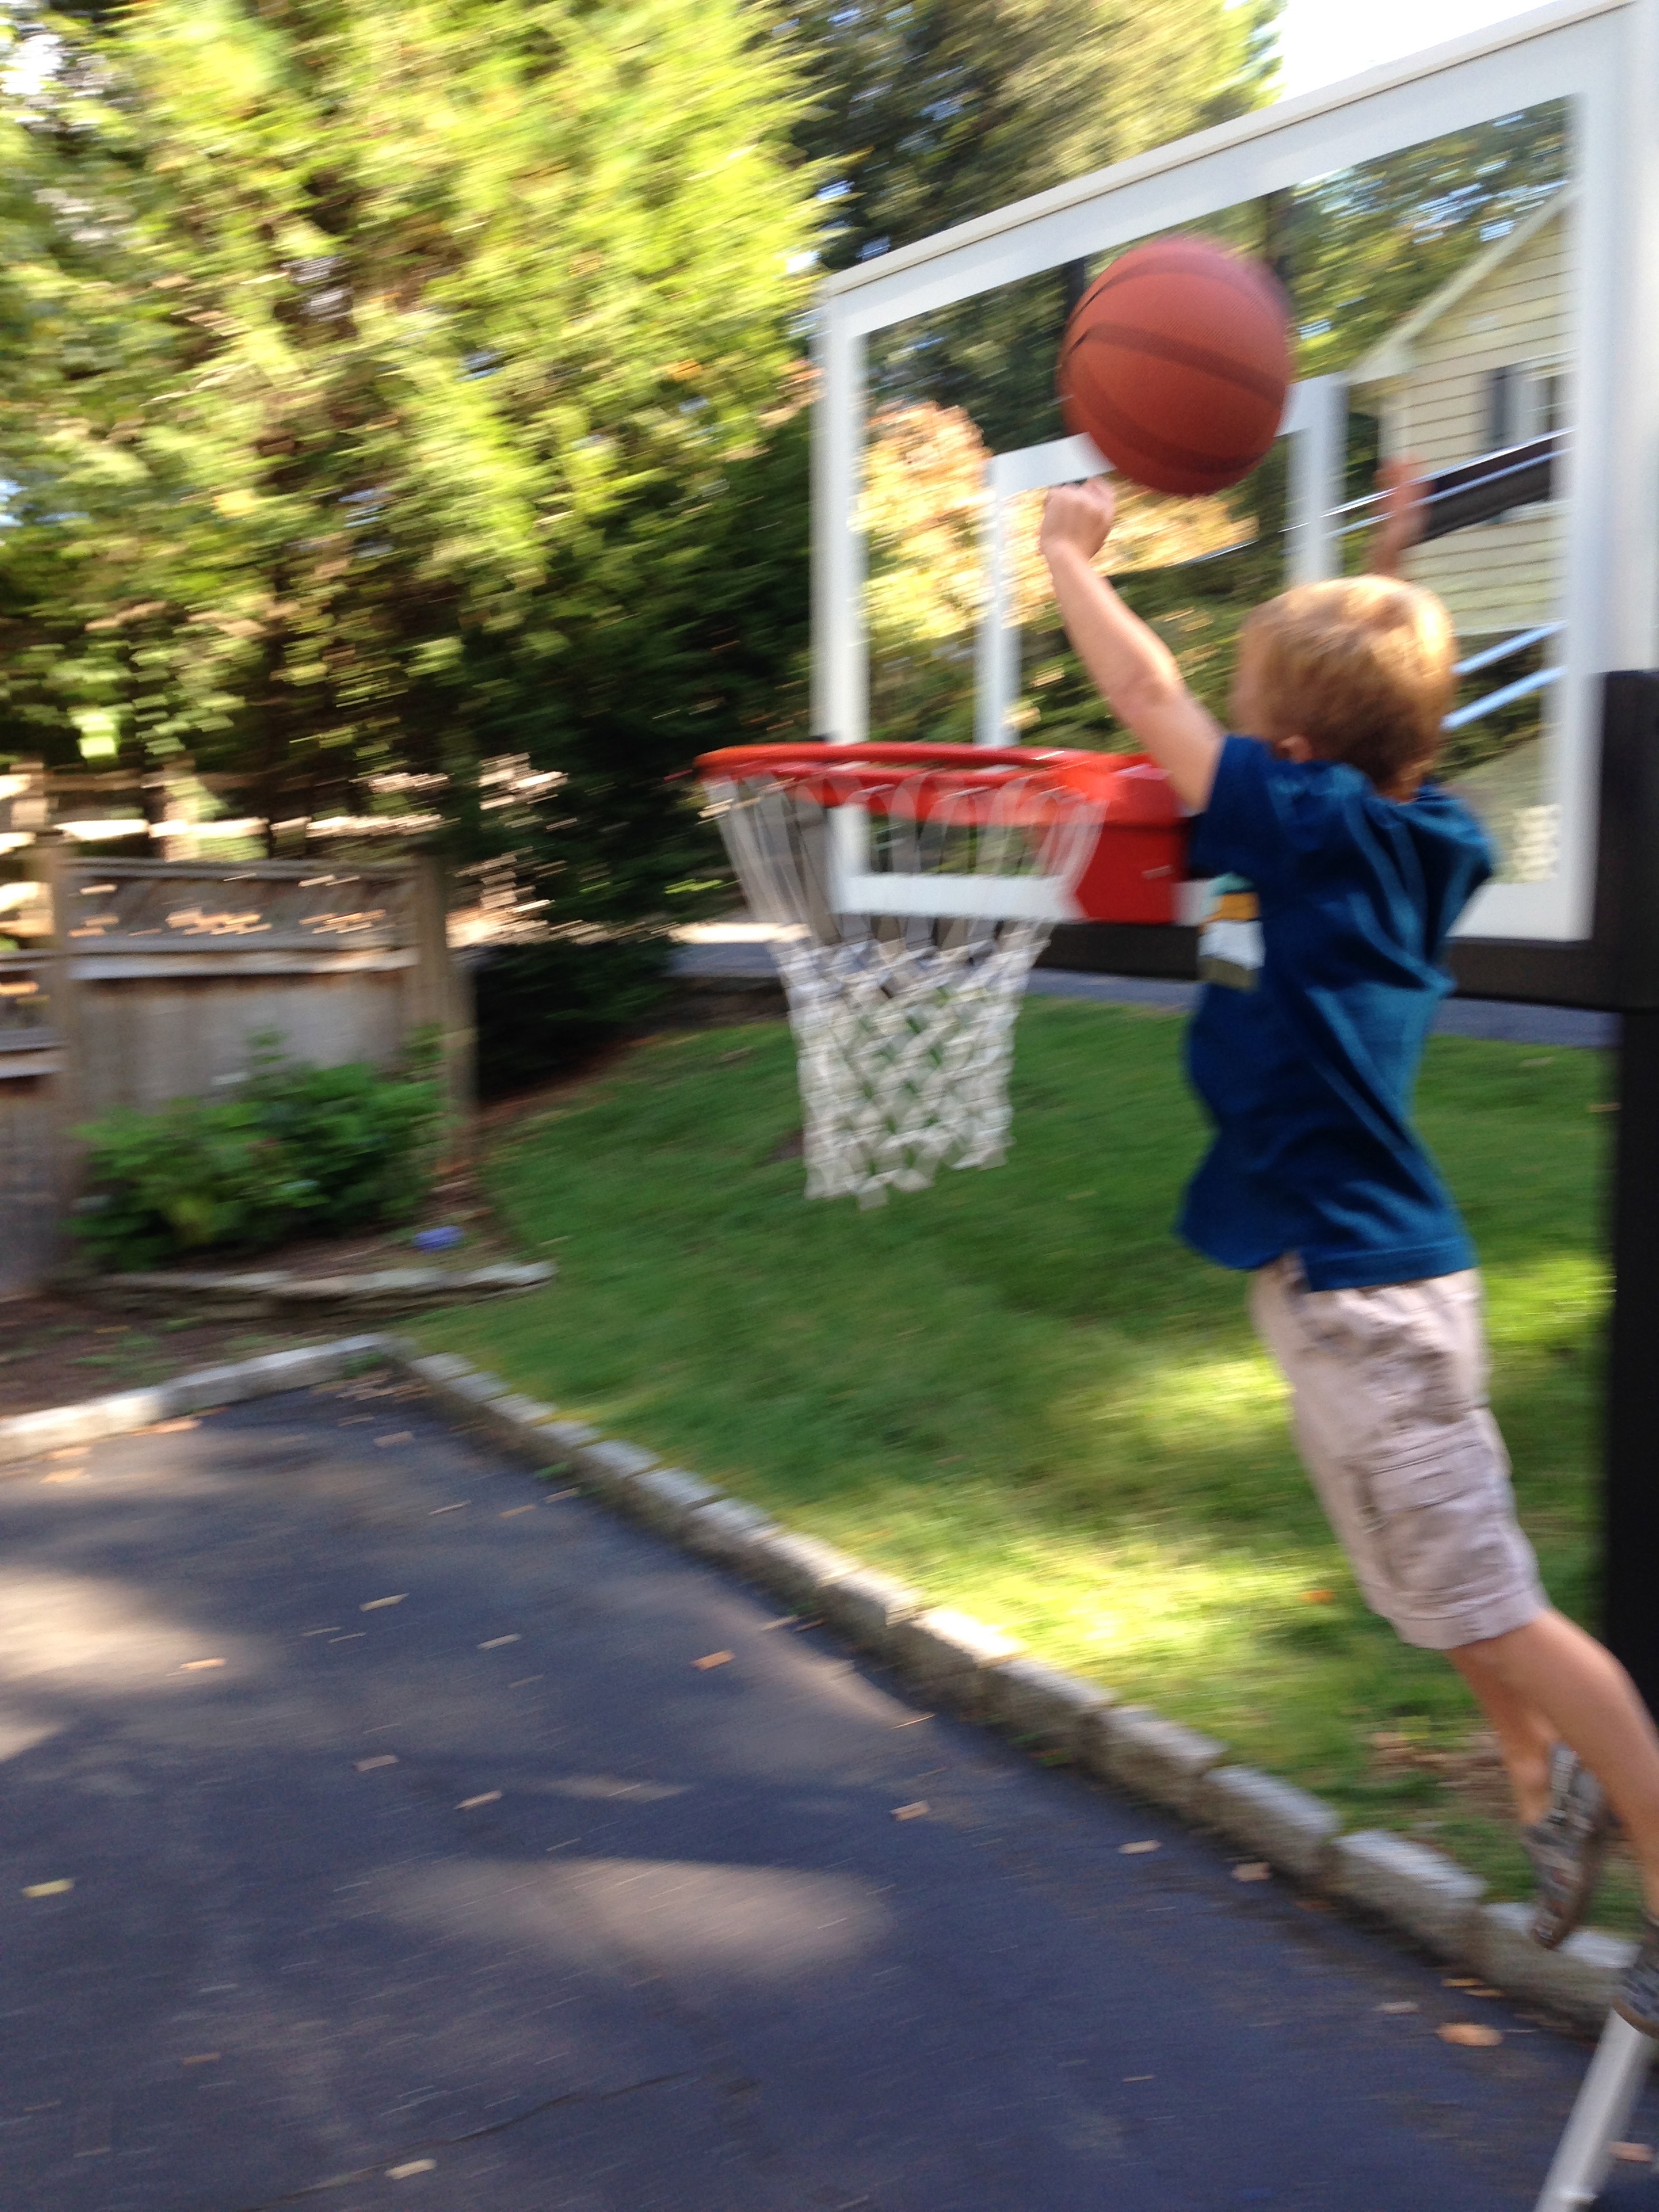 Amy's son is enjoying with his dunks.